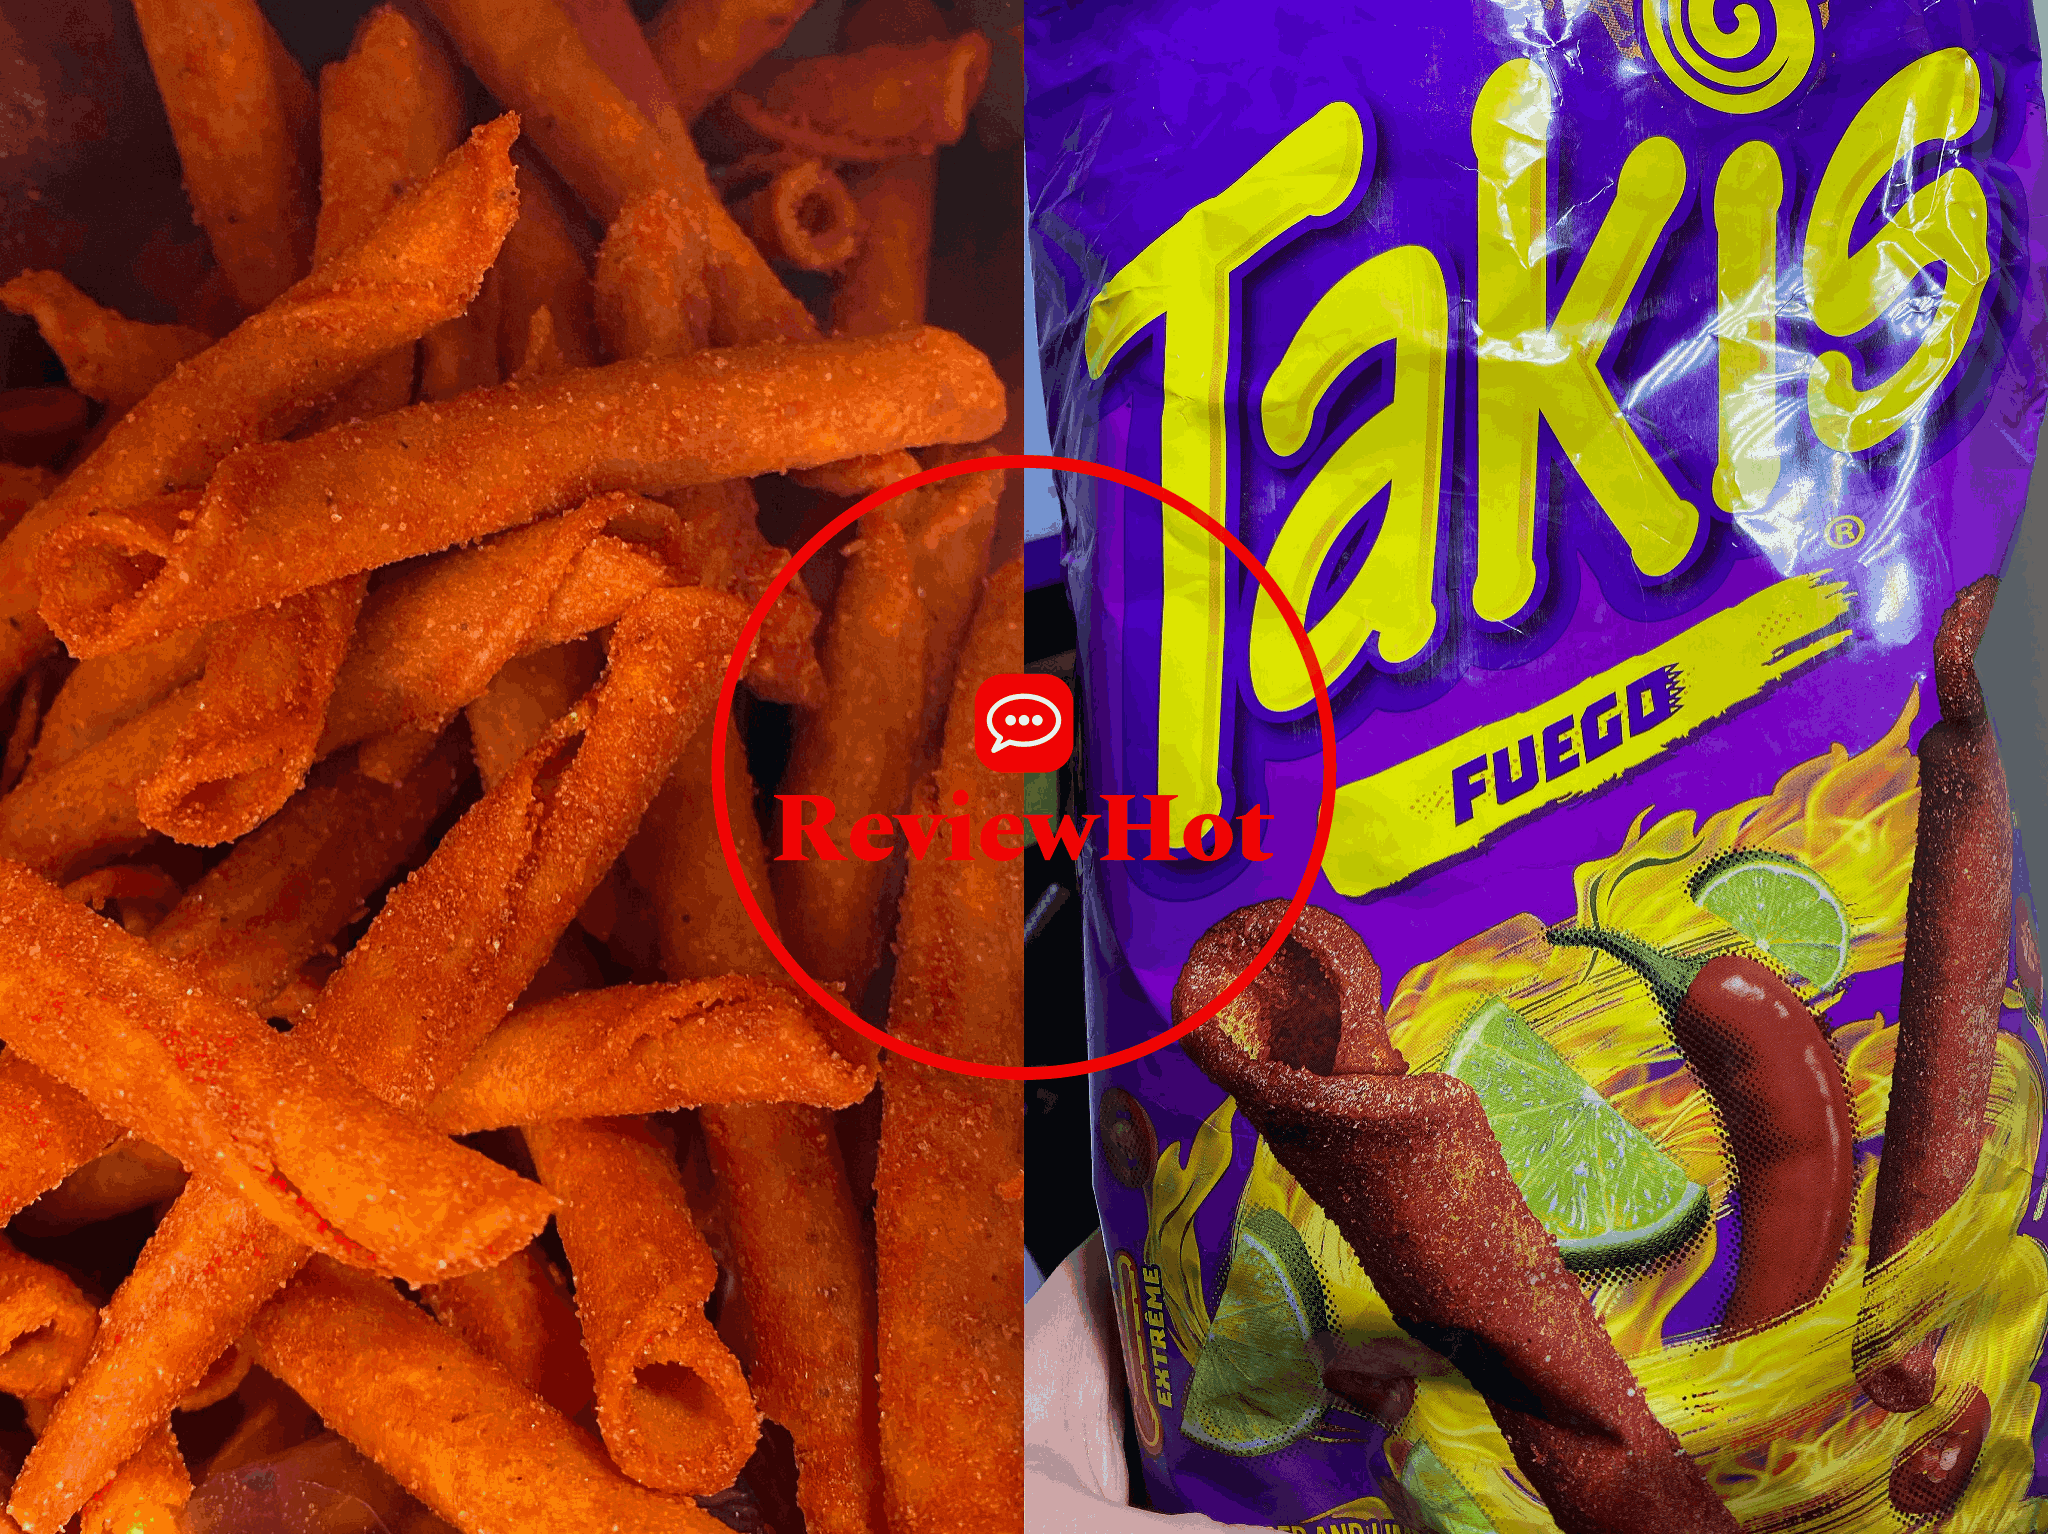 The package and the details of Takis Fuego Spicy Chili Pepper and Lime Rolled Tortilla Chips